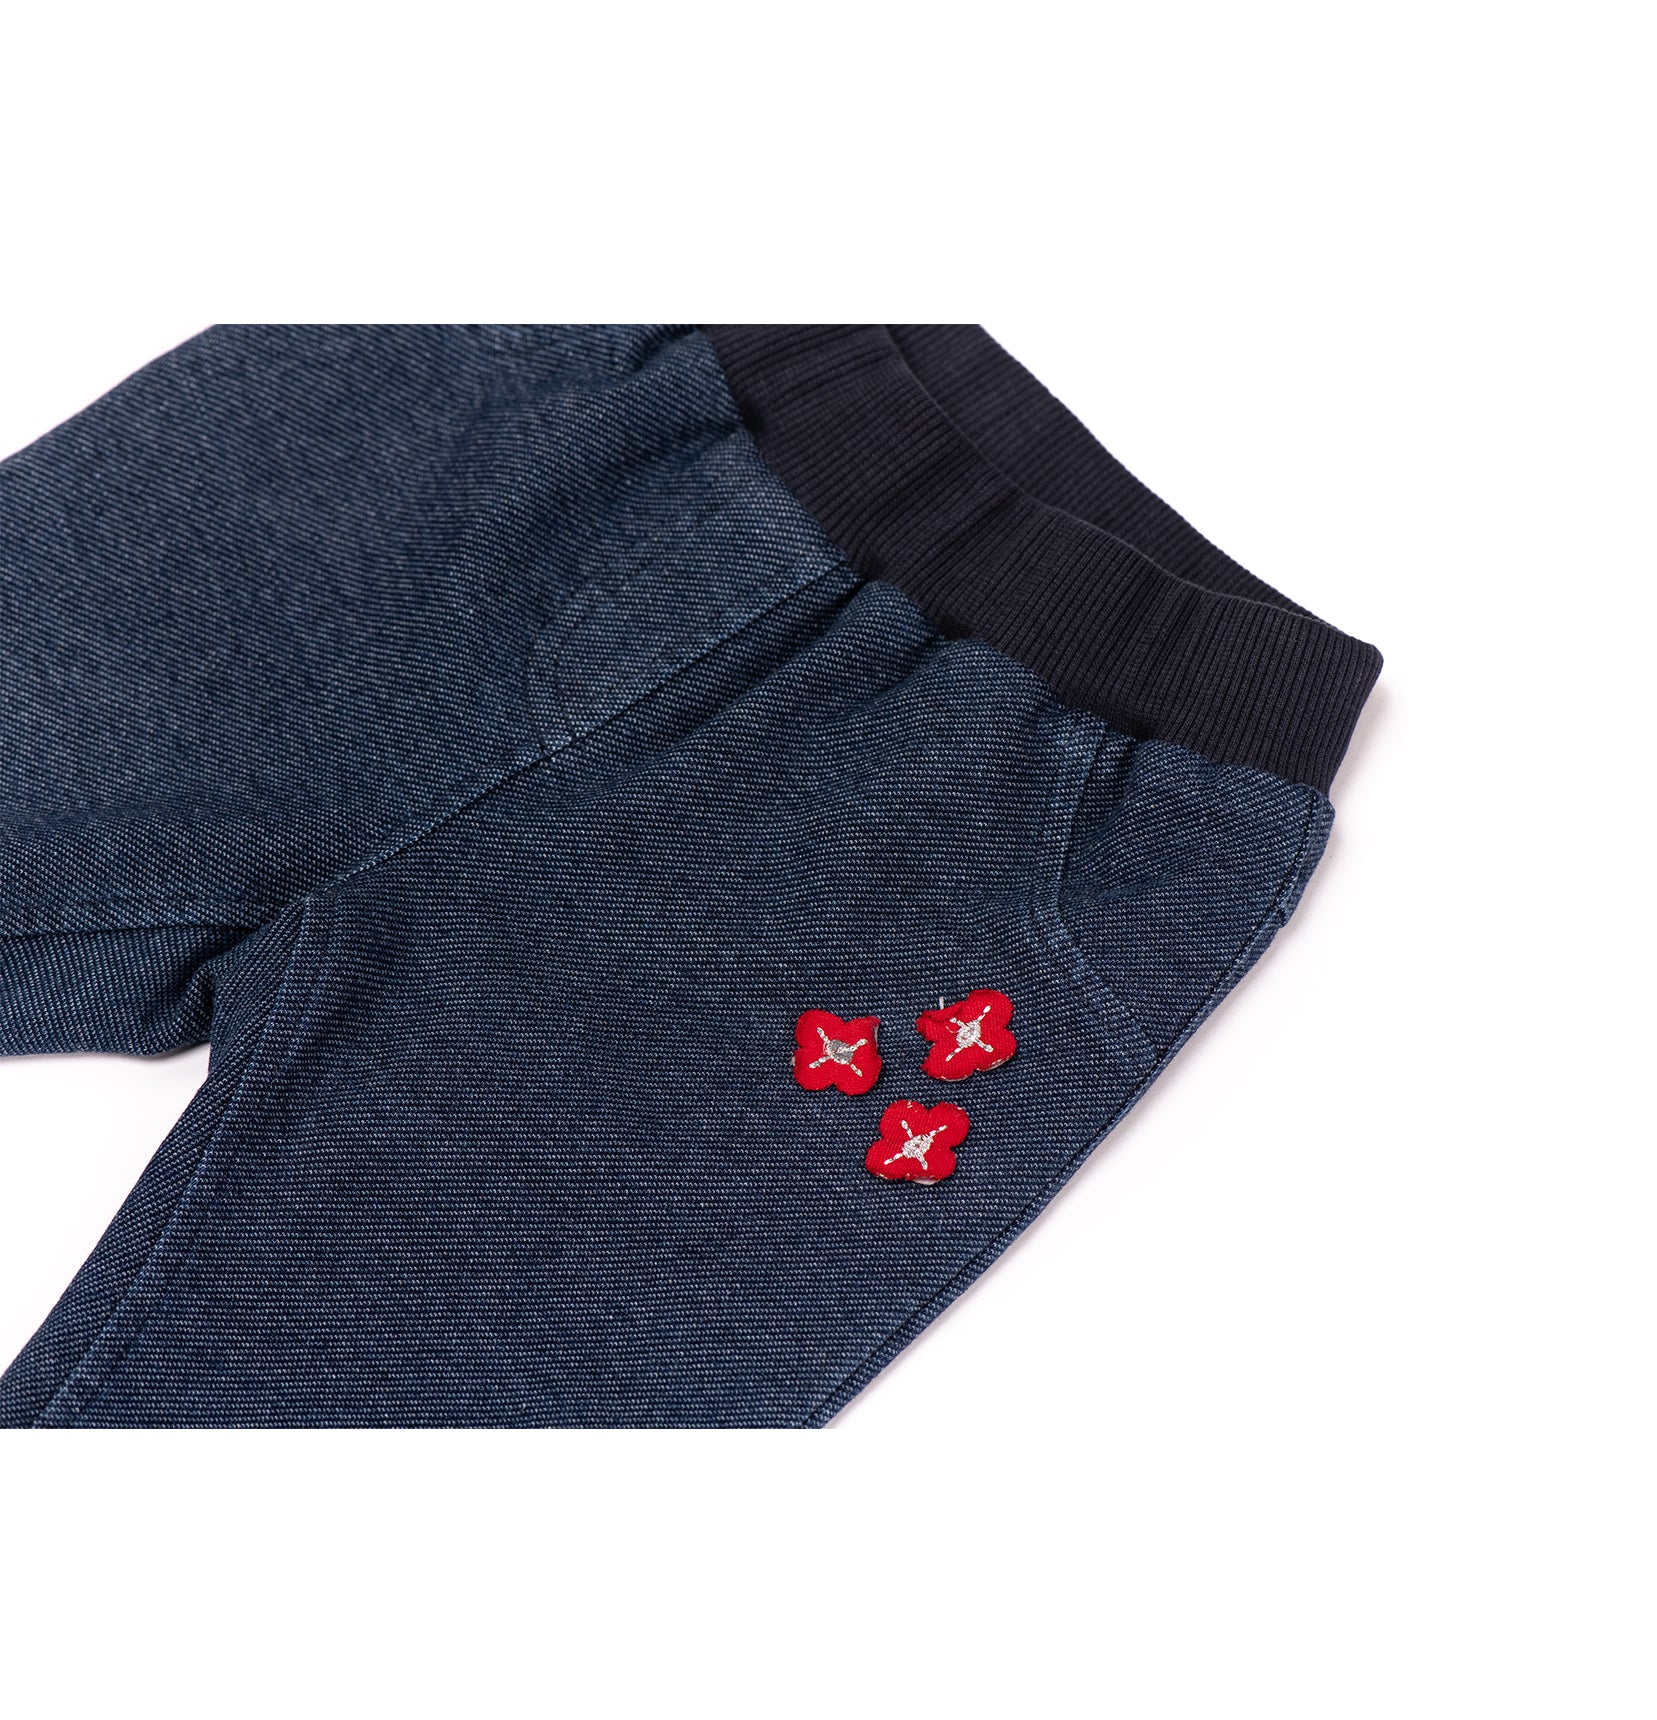 Stylish baby girl pants with flowers by Pompelo